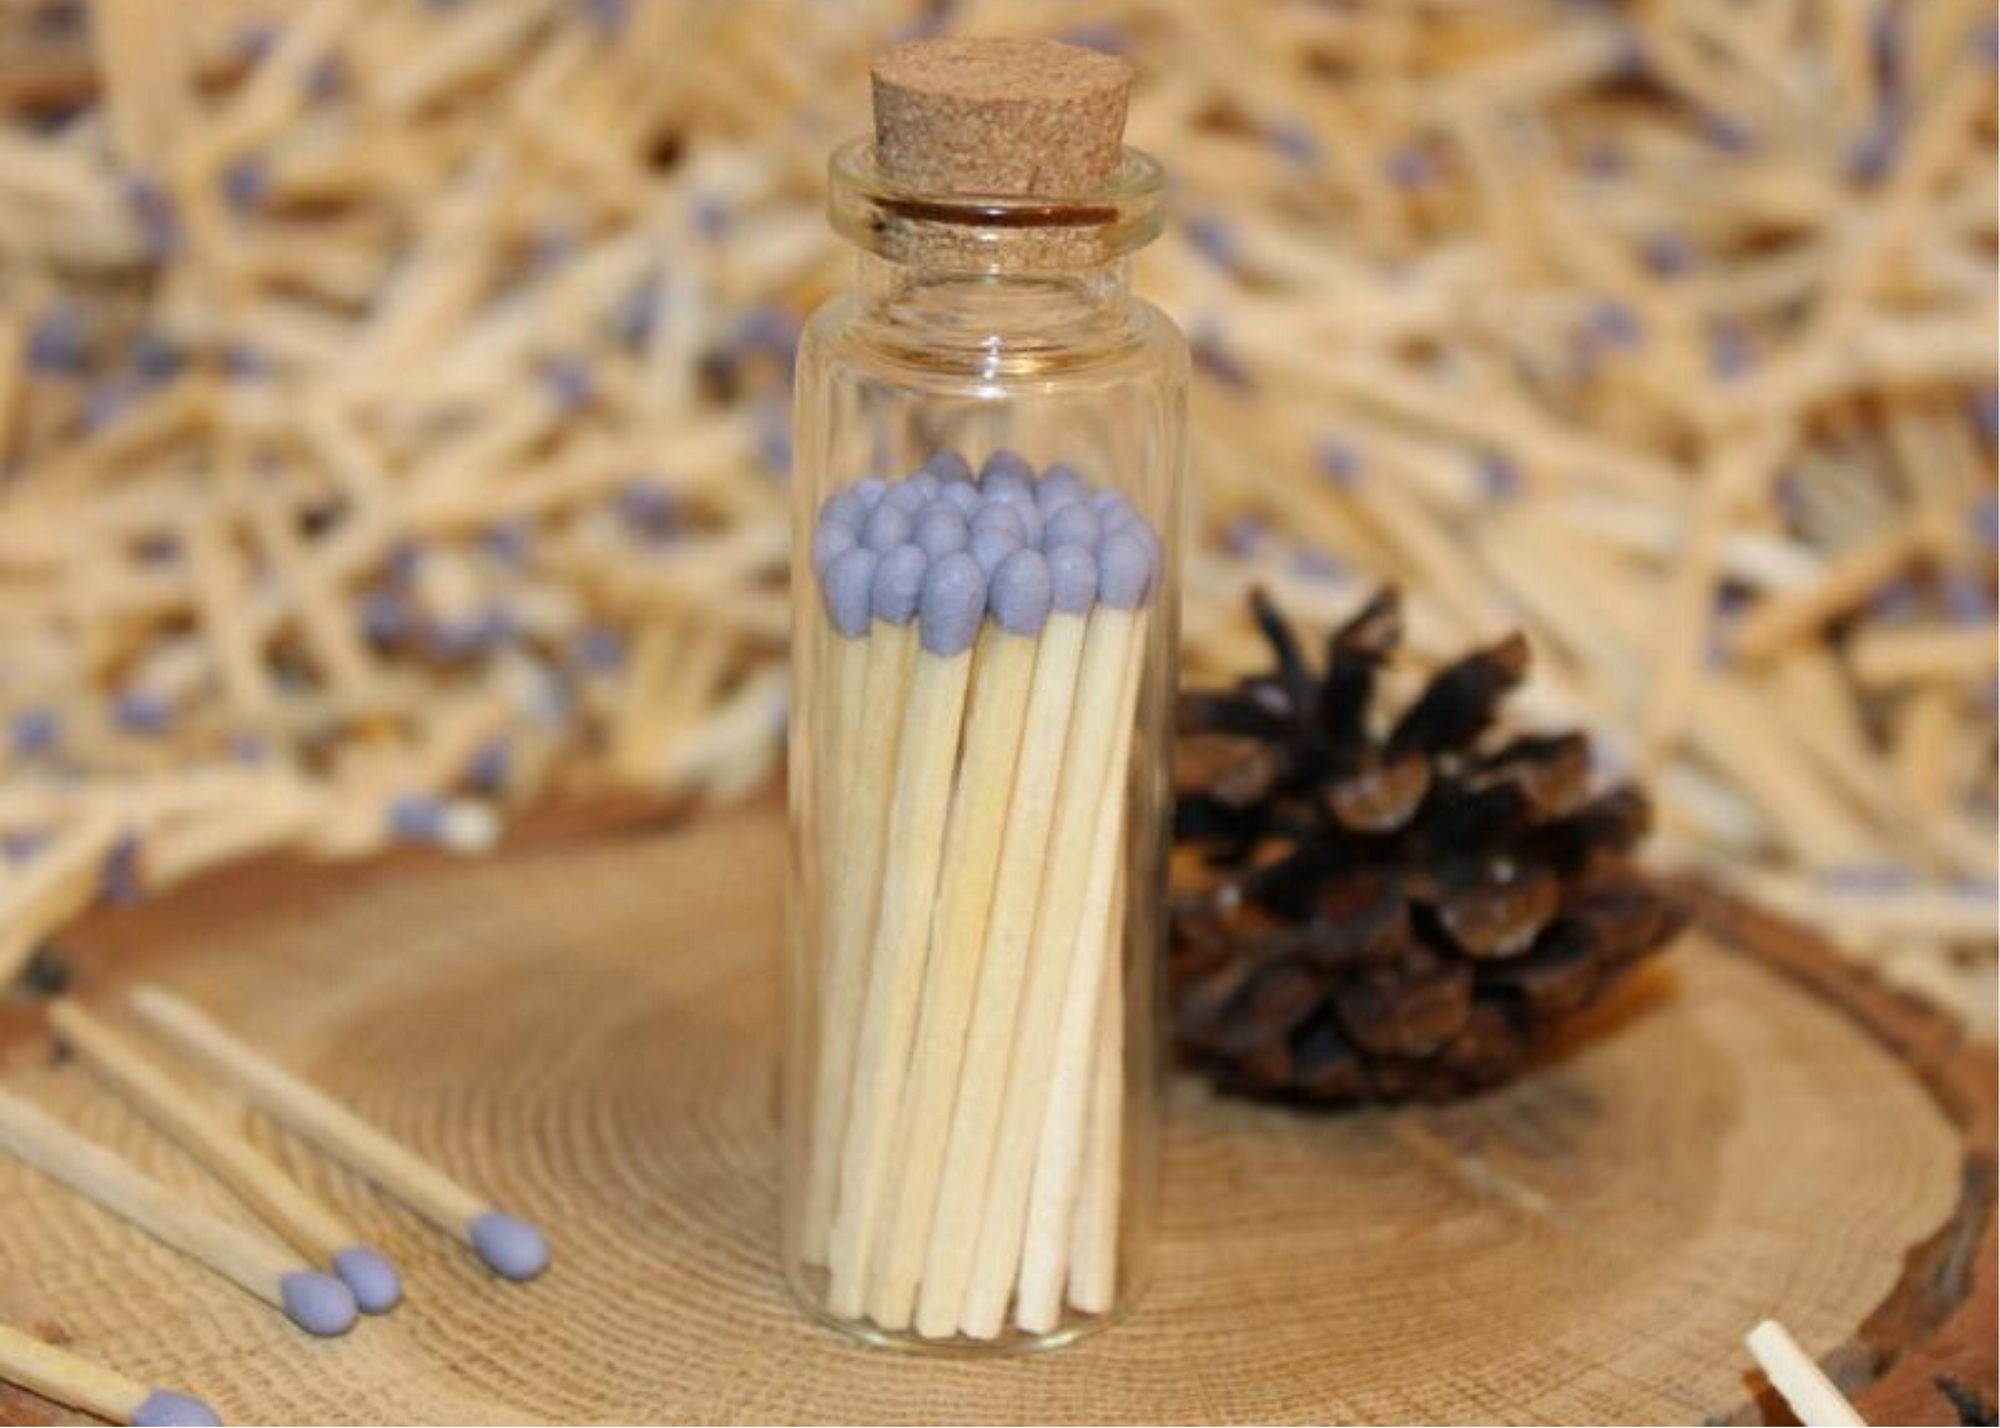 Safety Matches, Lavender Matches, Colorful Matches Candle Accessories  Candle Add on Gift, Matches and Striker, Matchsticks, 40 Count Matches 